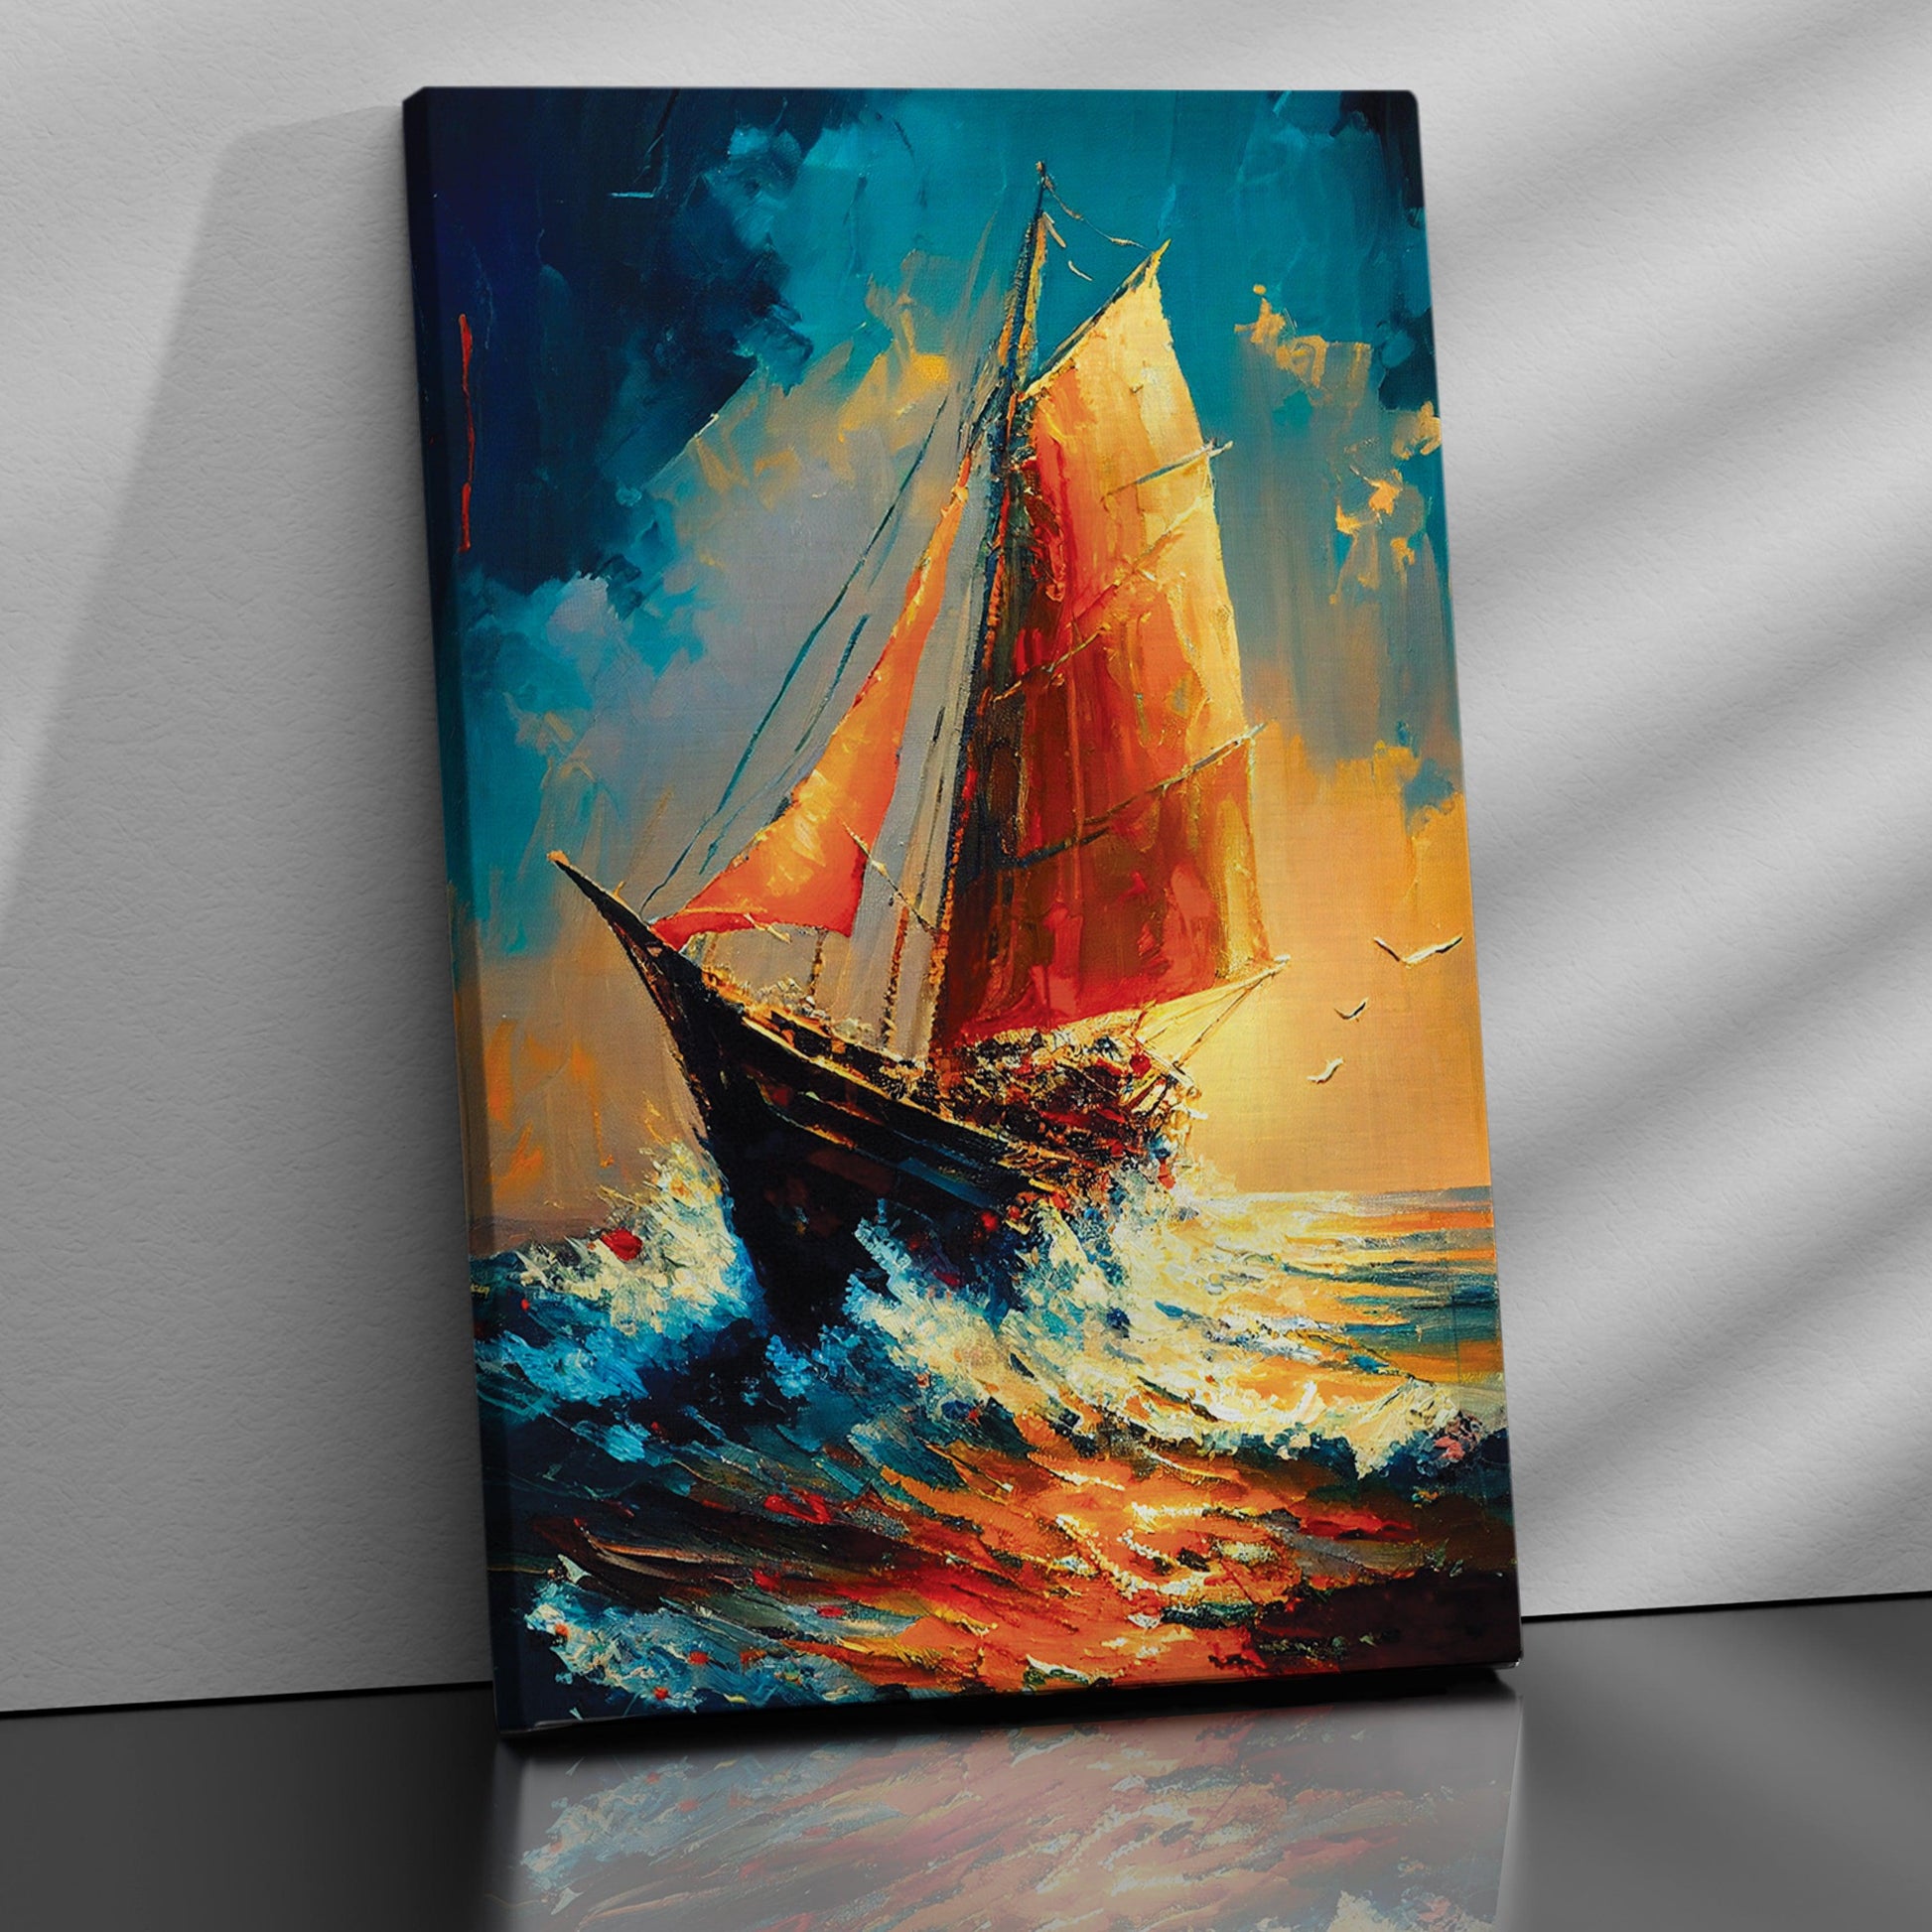 Modern Sailboats in Wild Ocean Canvas Painting - Modern Boat